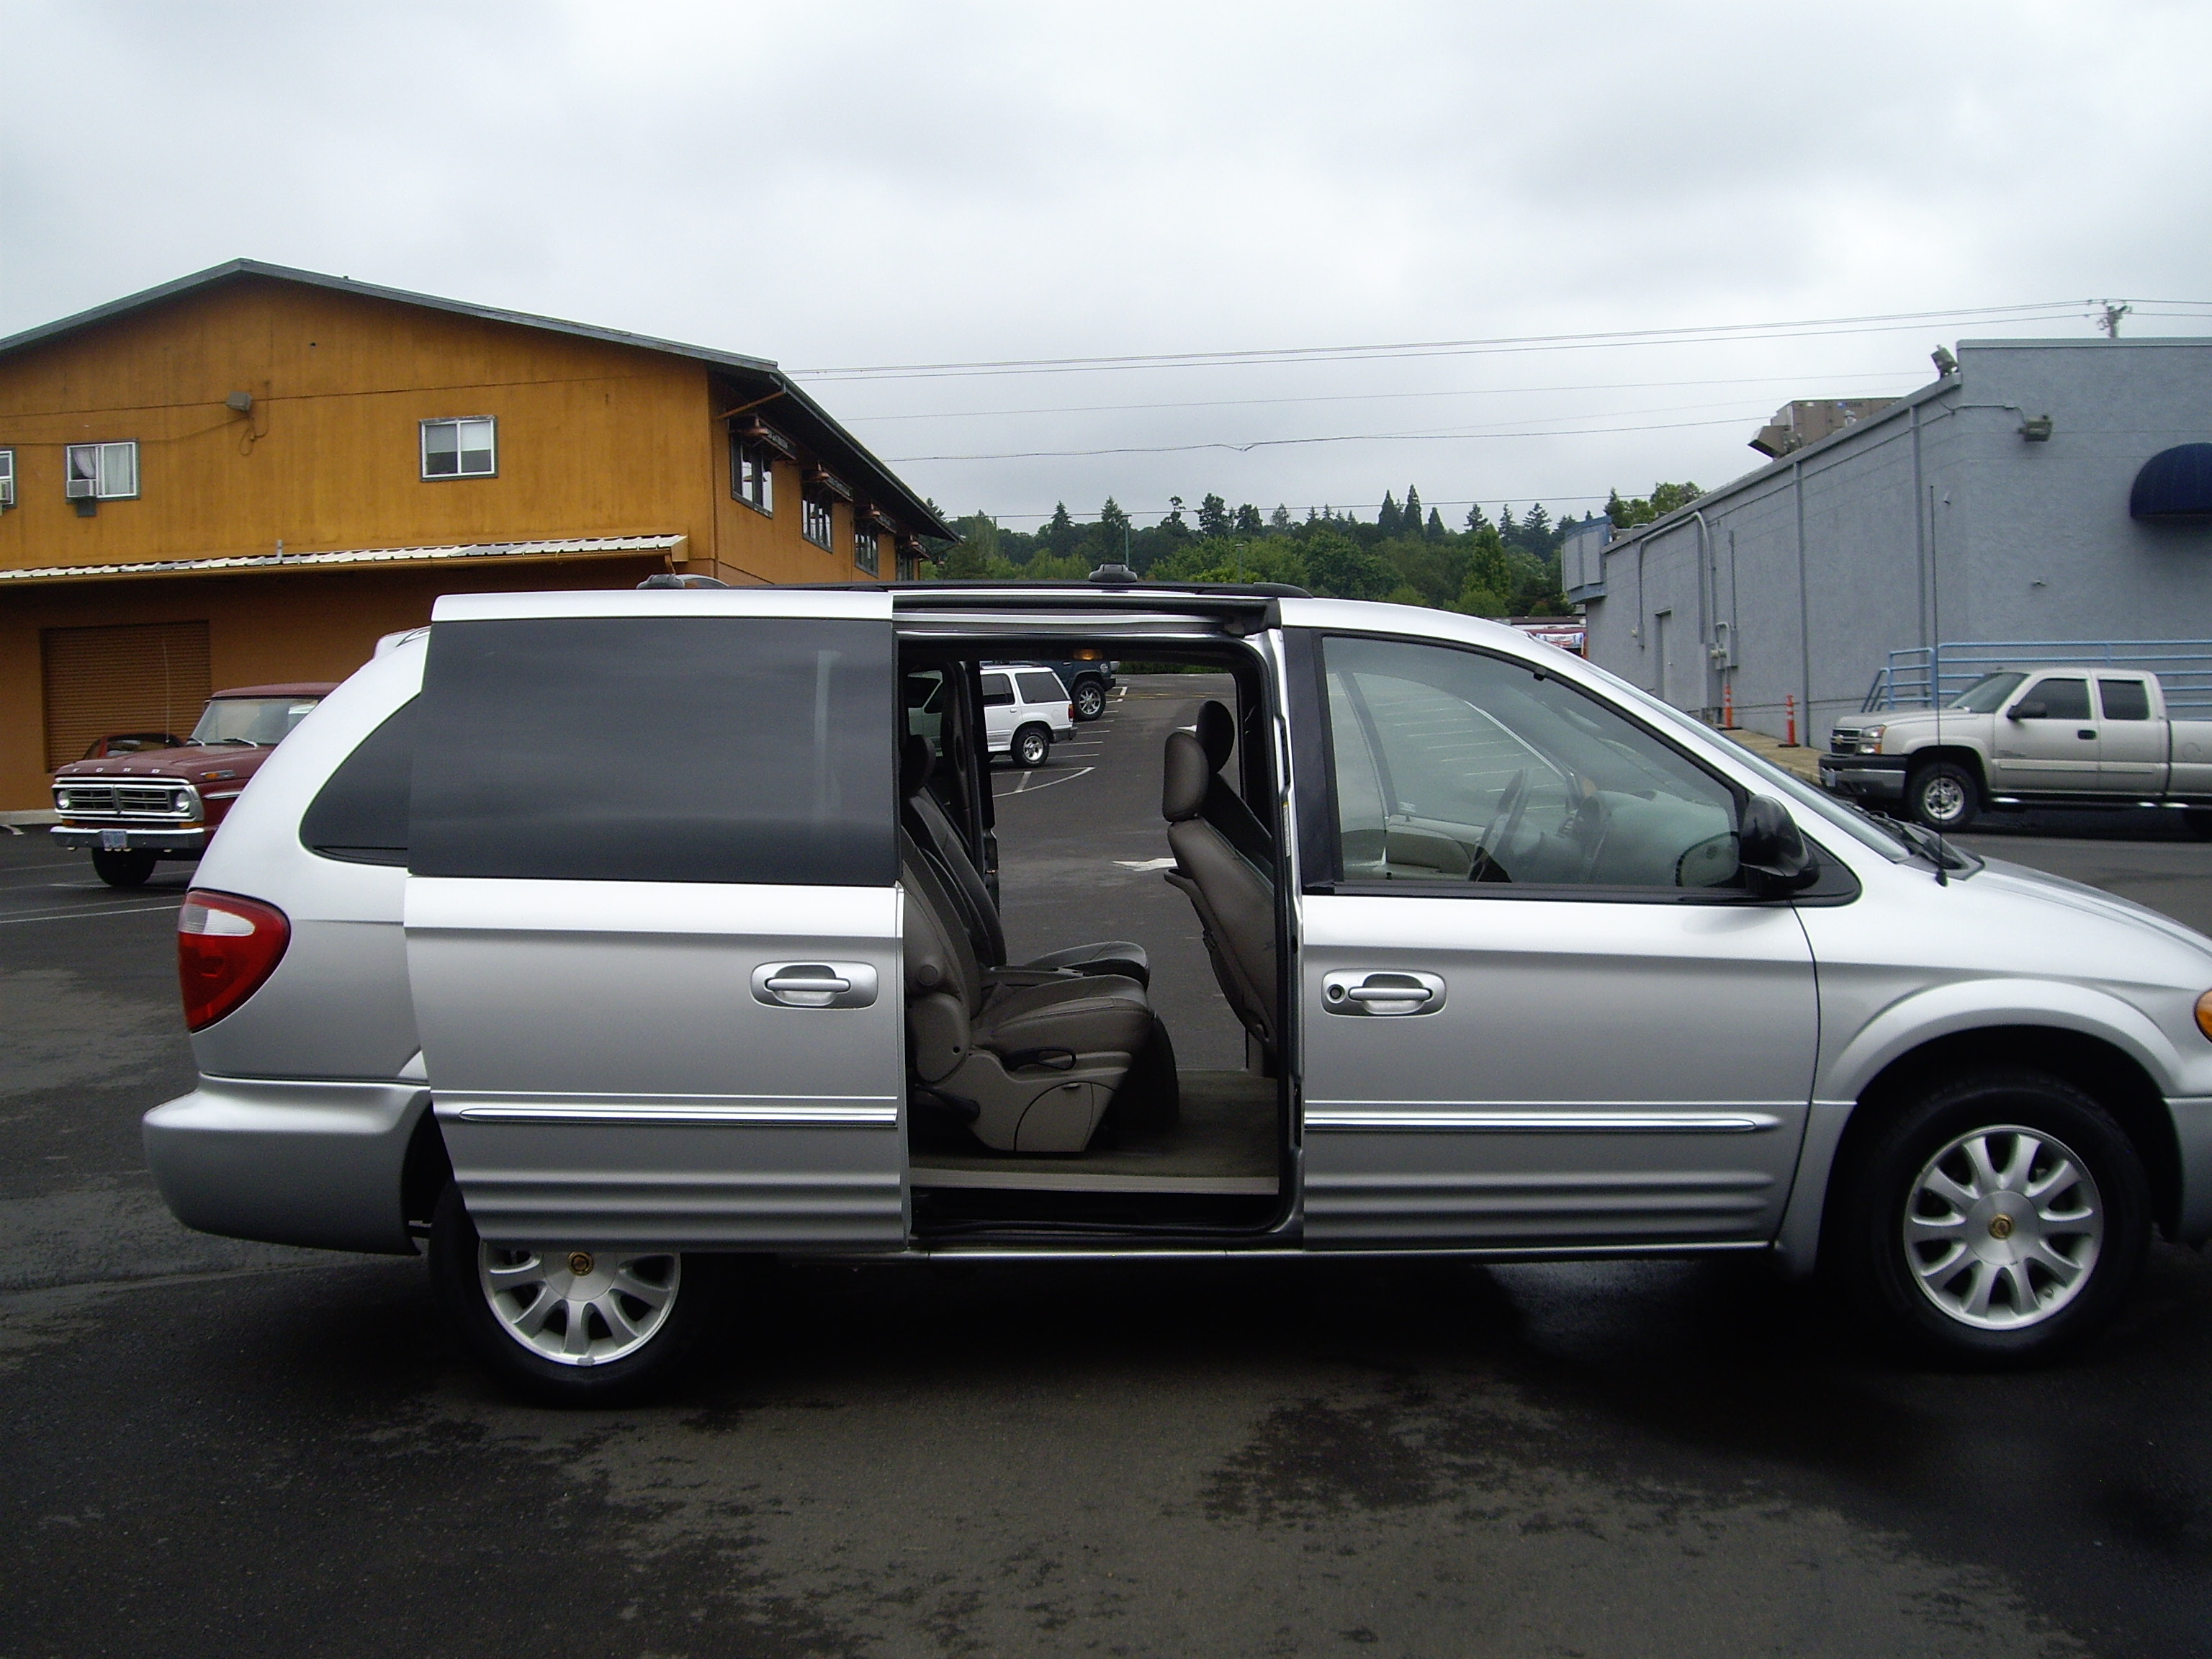 2002 Chrysler Town and Country VIN Number Search